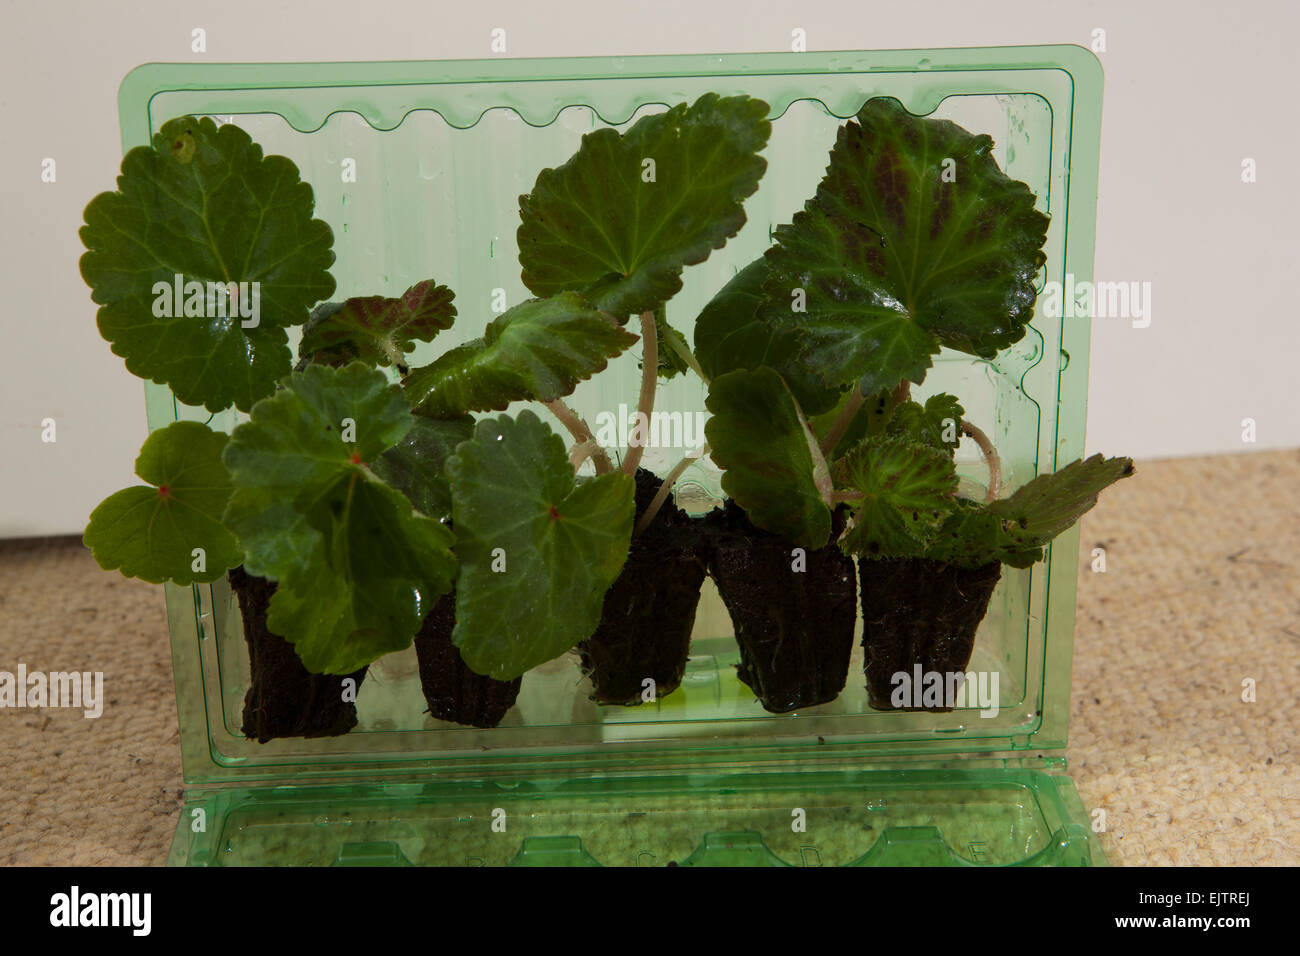 Garden Plants ( Trailing Begonia )  bough on line and delivered by post, showing plugs plants and the plastic packing. Stock Photo